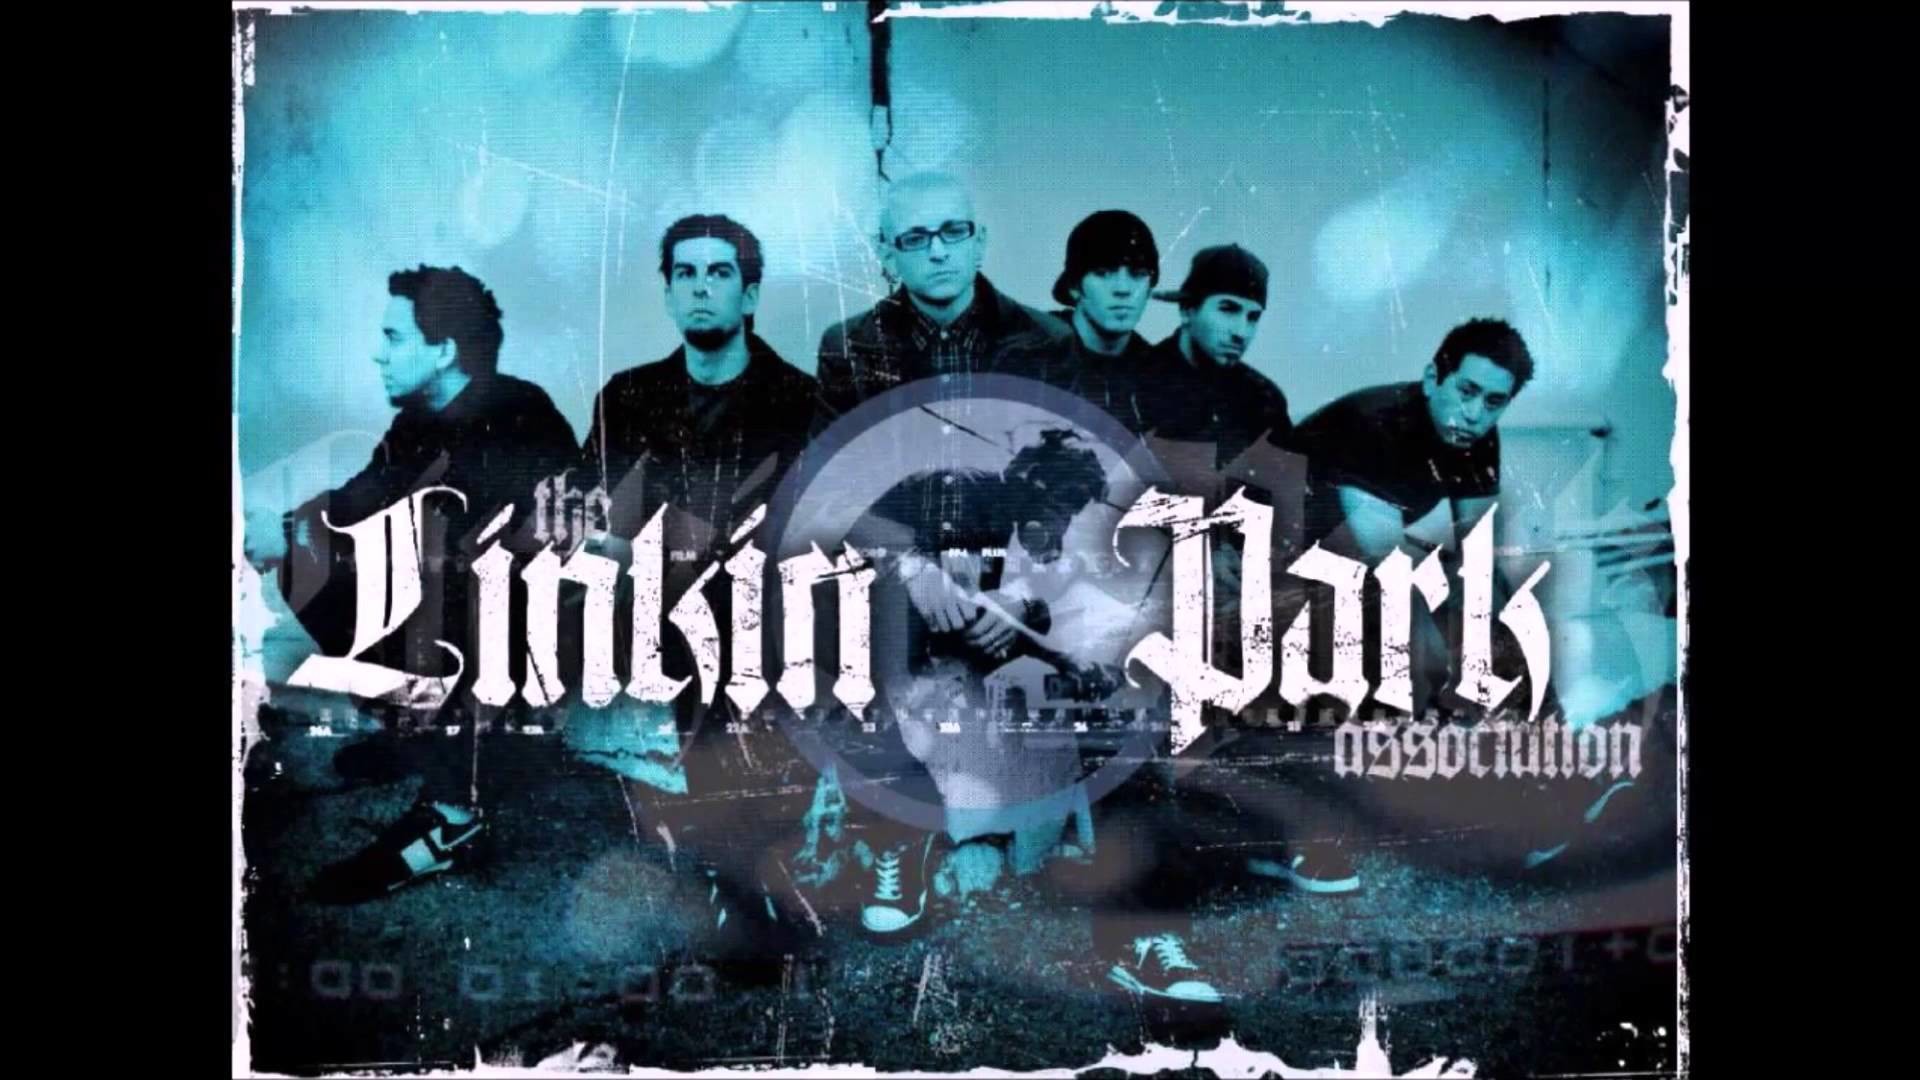 its going down linkin park download torrent